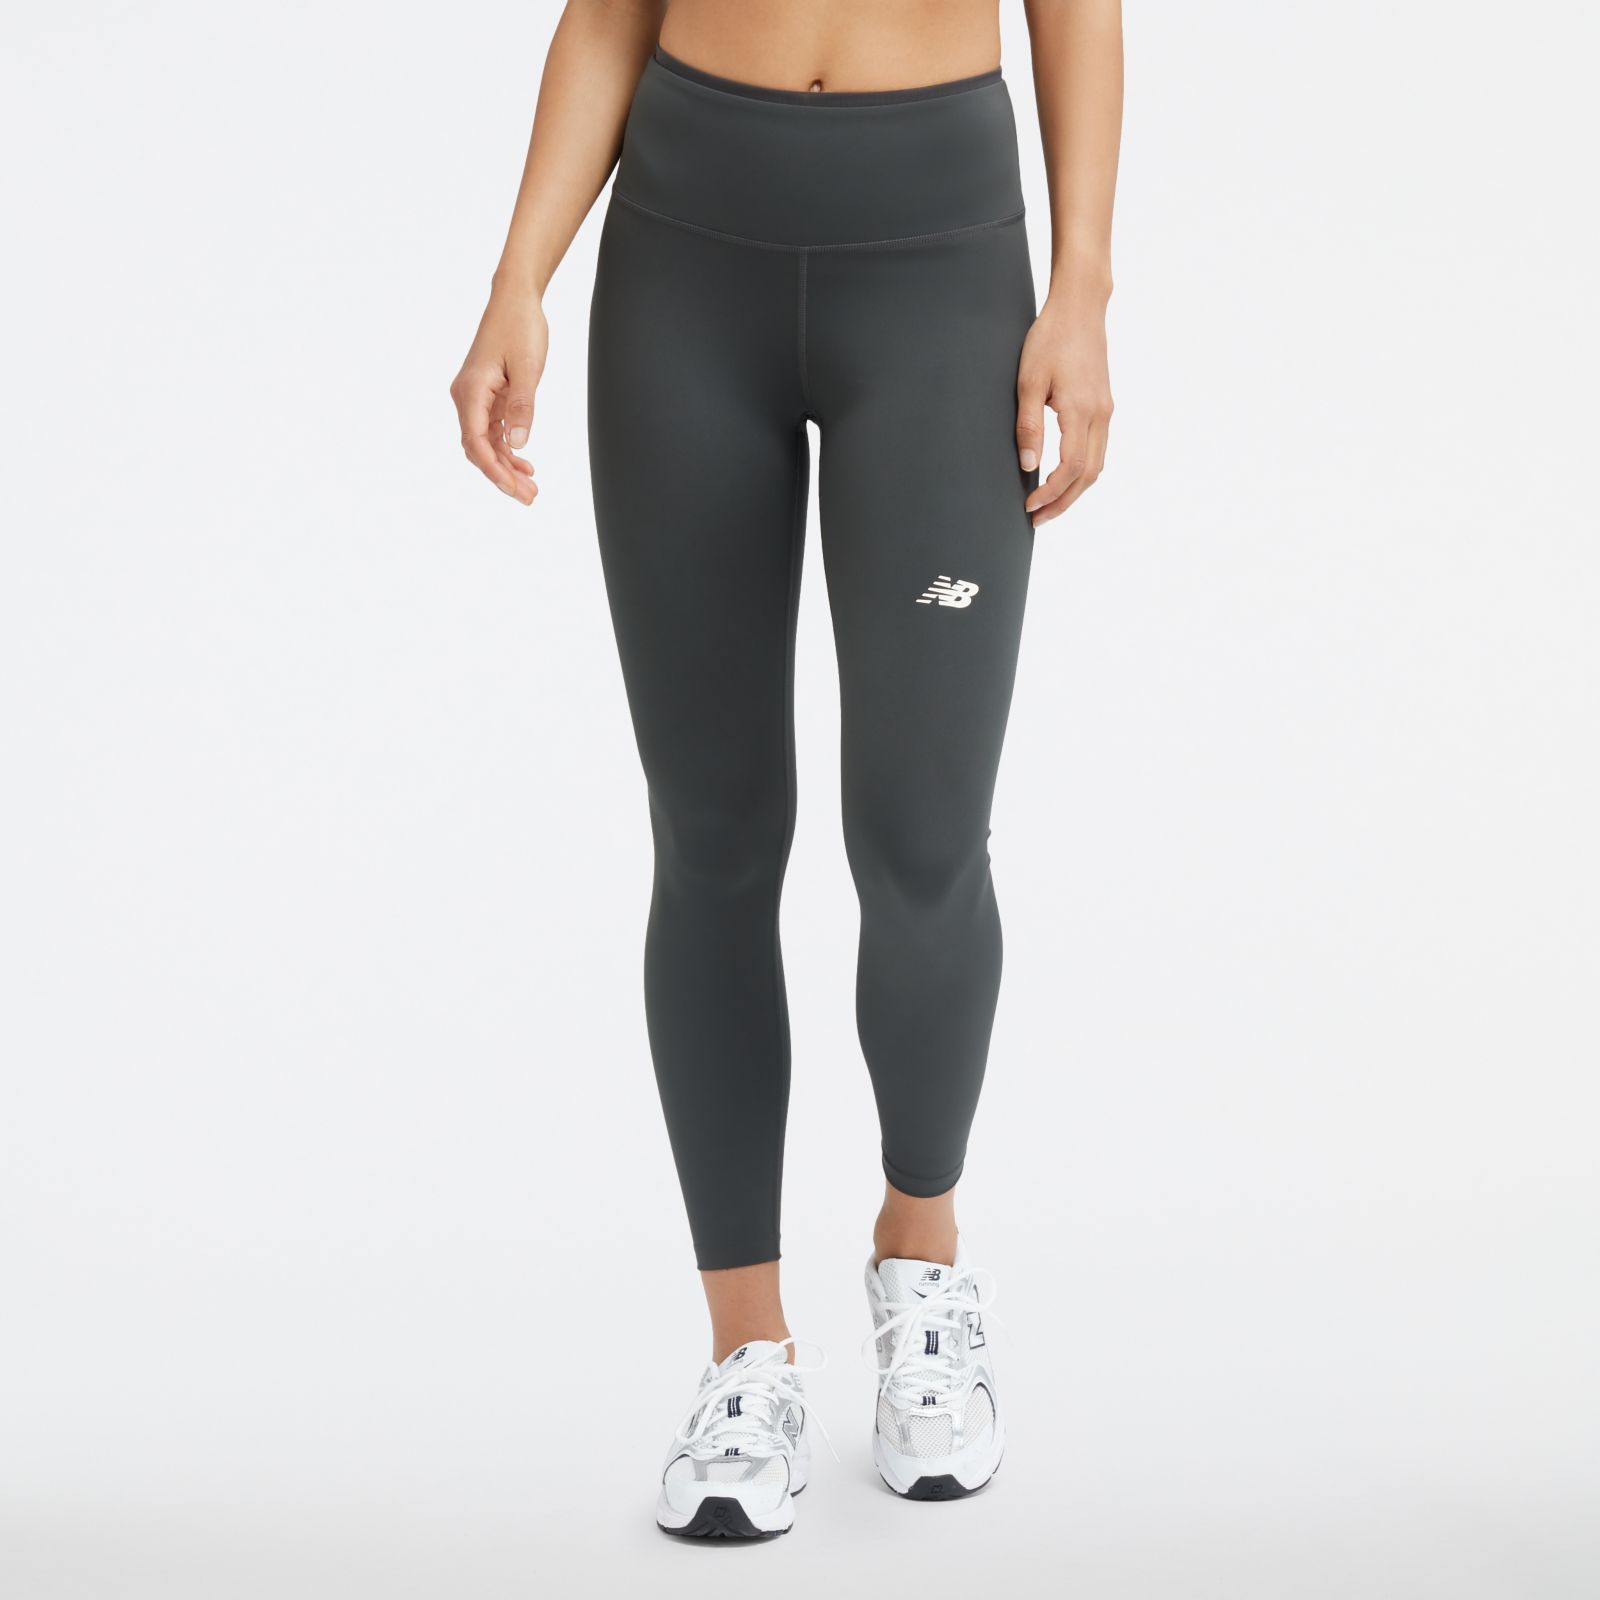 New Balance Leggings - Only Show Exclusive Items - JD Sports Global